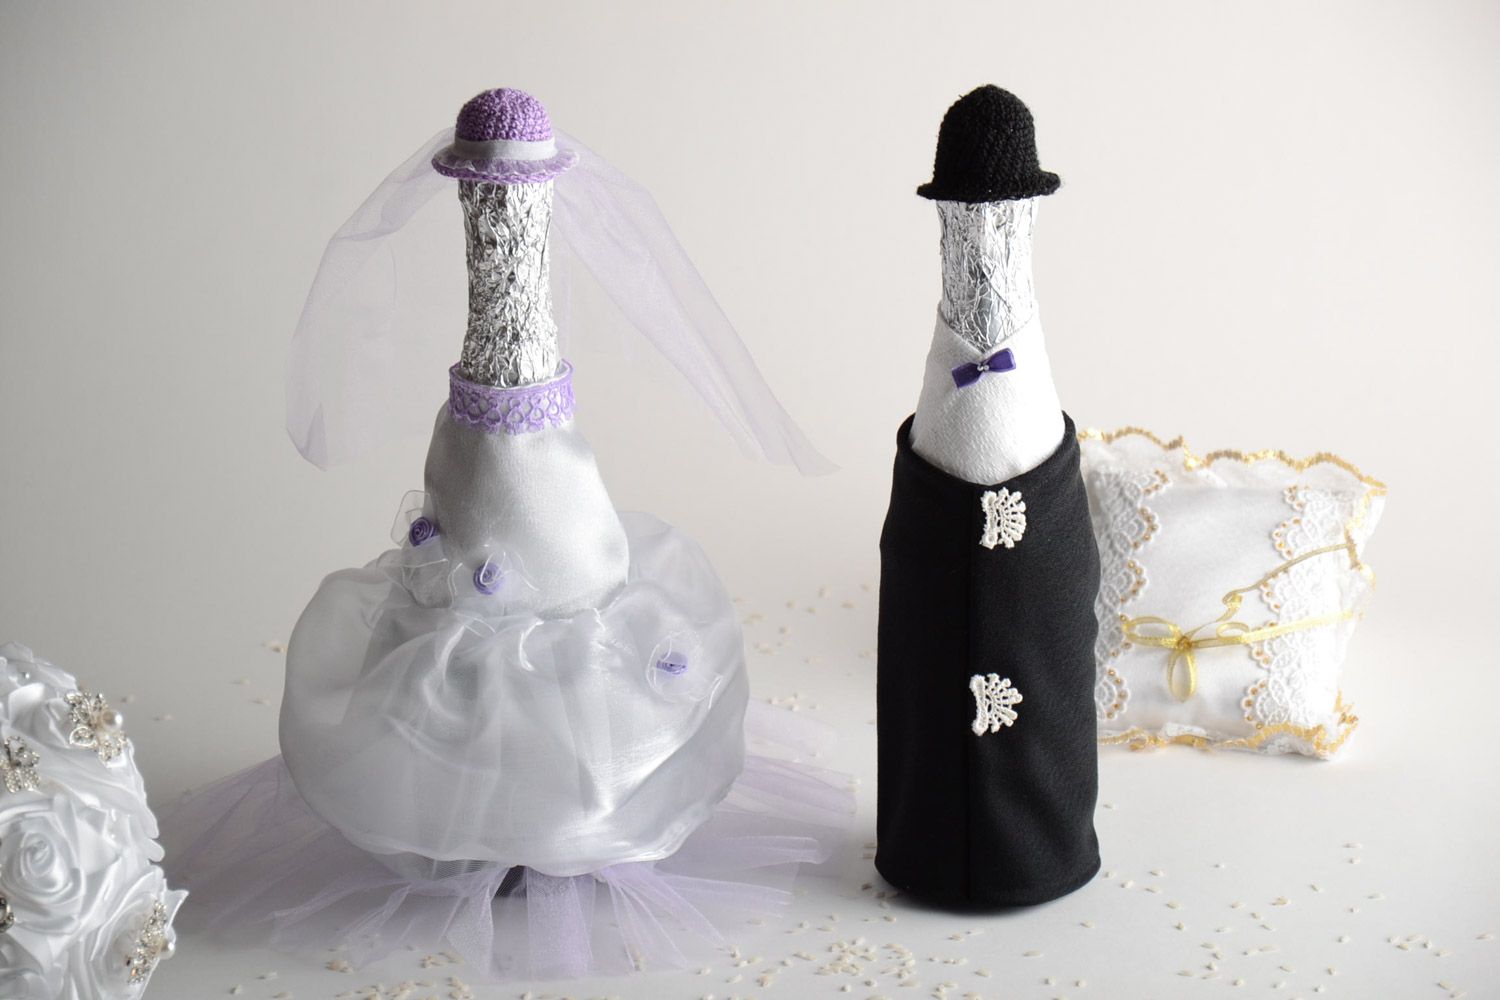 Handmade wedding decorations for champagne bottles suits of bride and groom photo 1